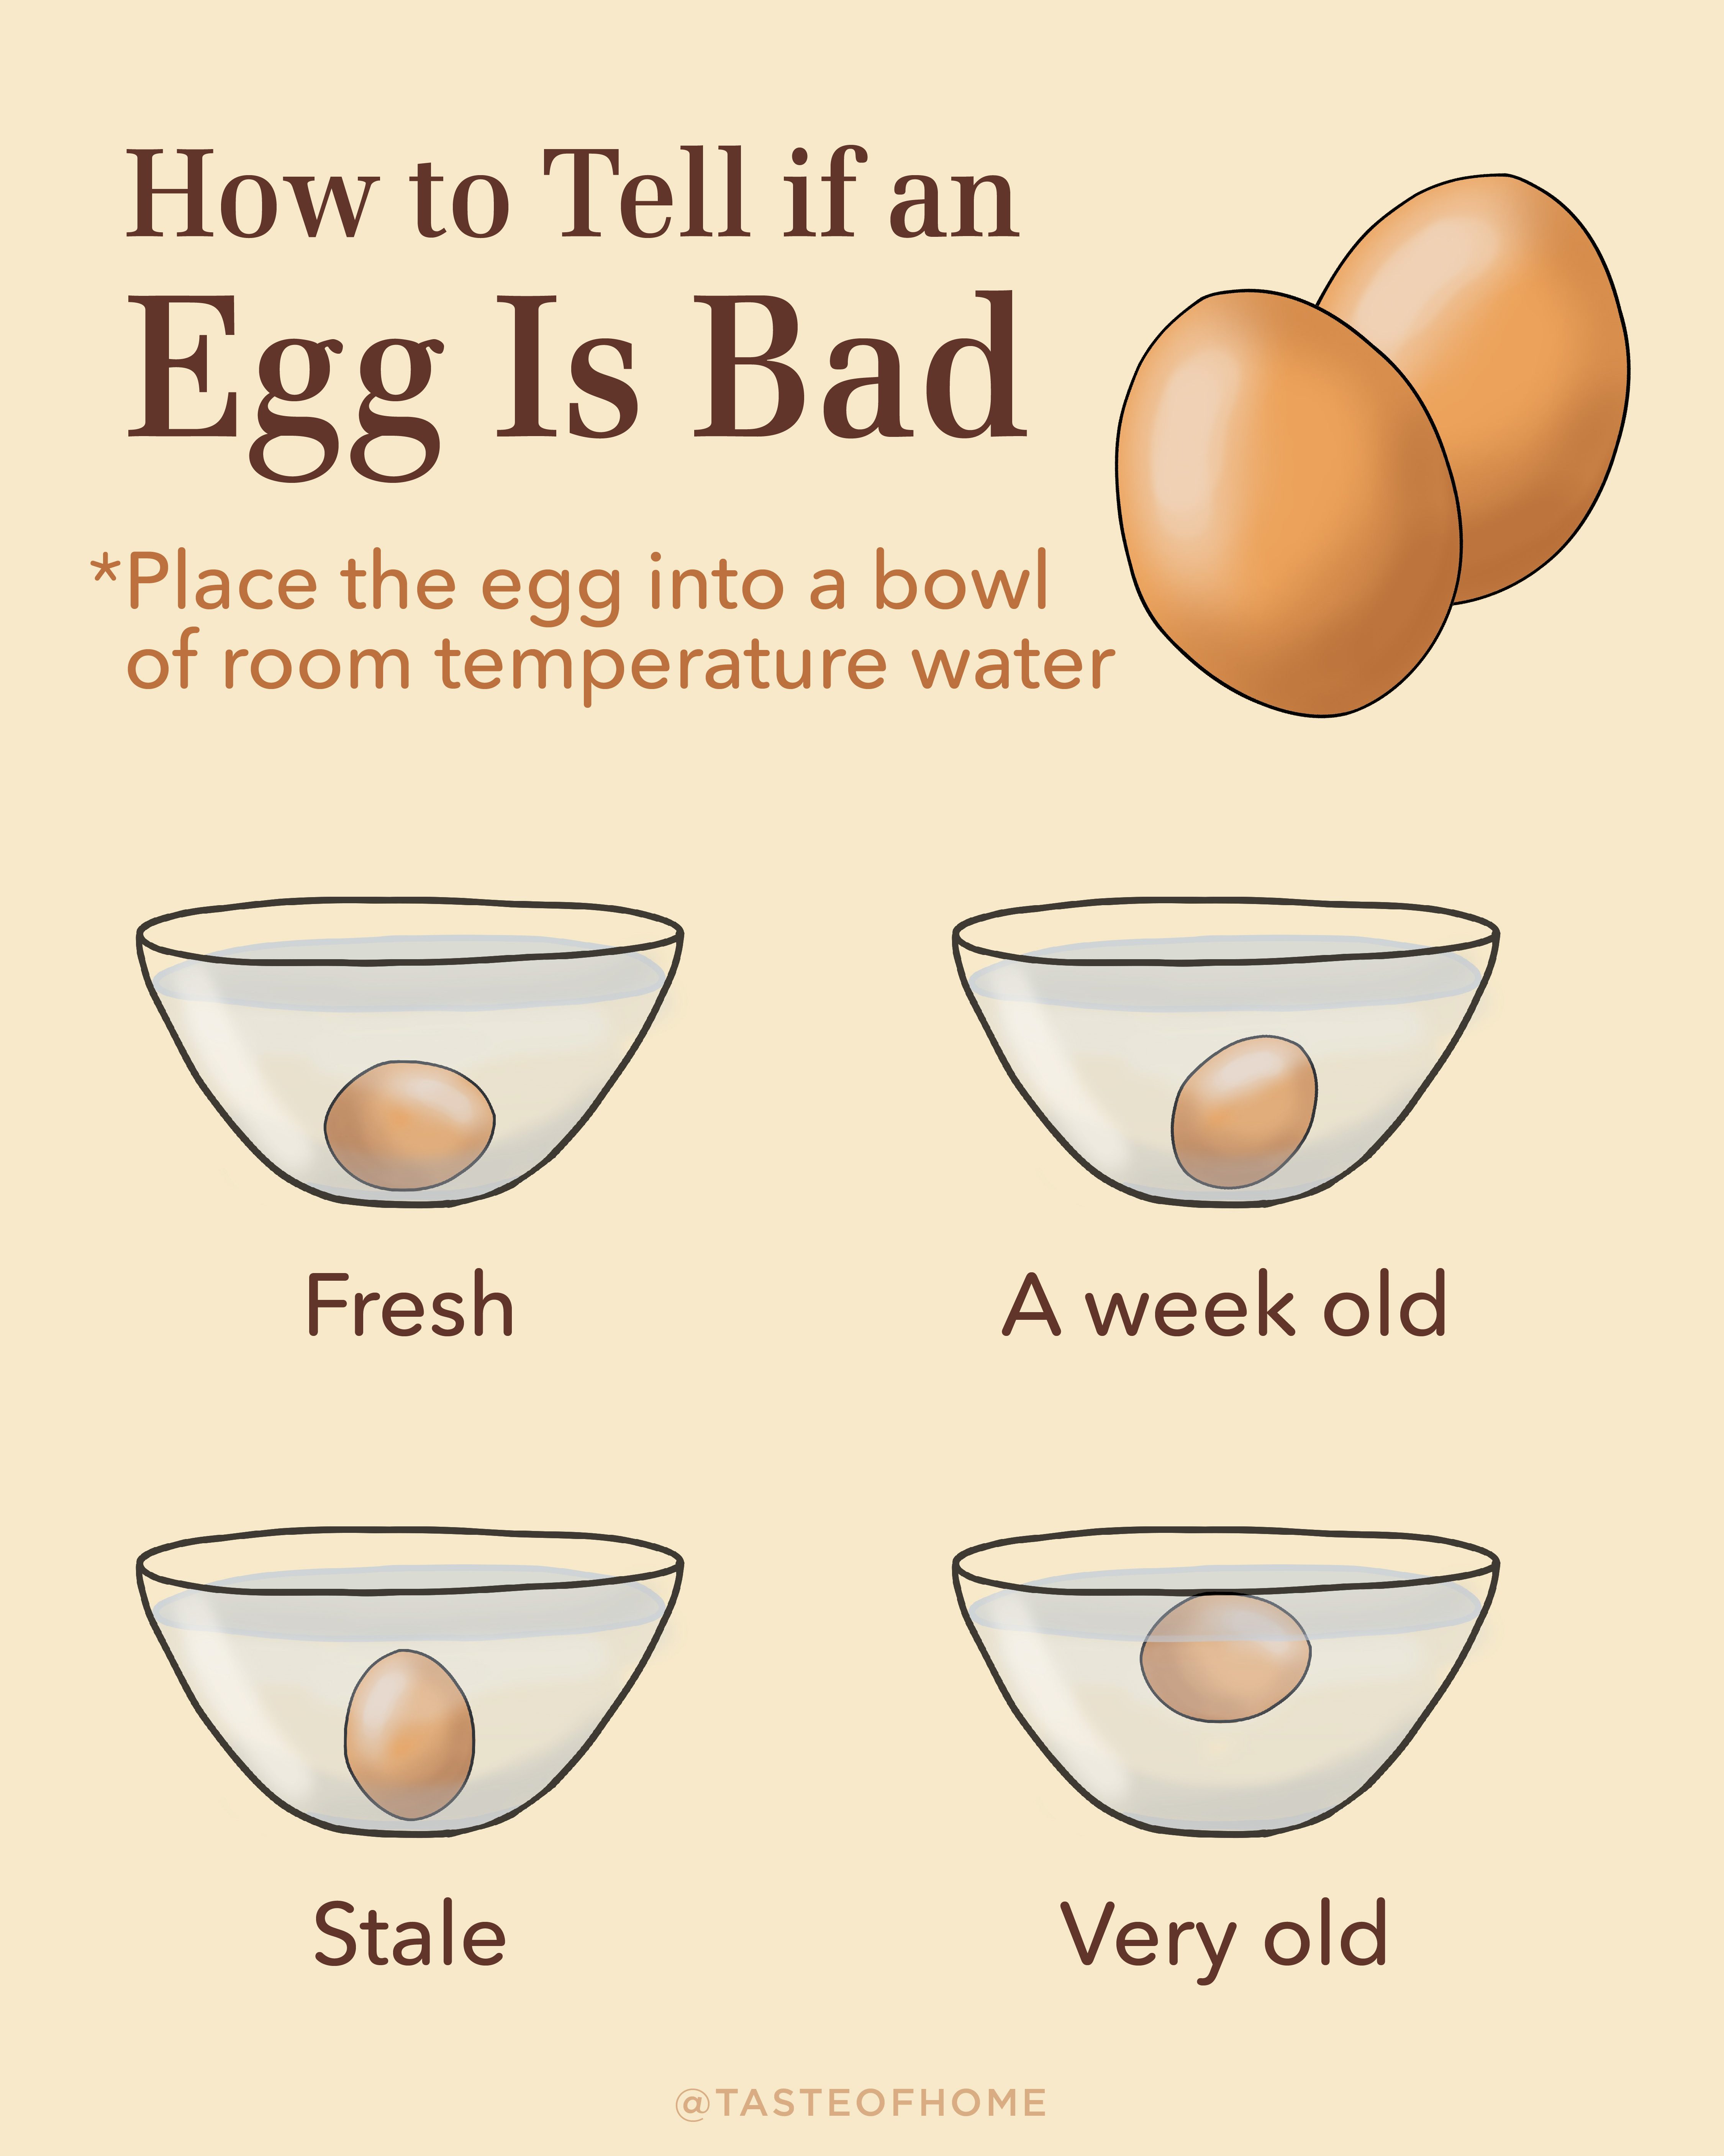 How to Tell If Eggs Are Bad